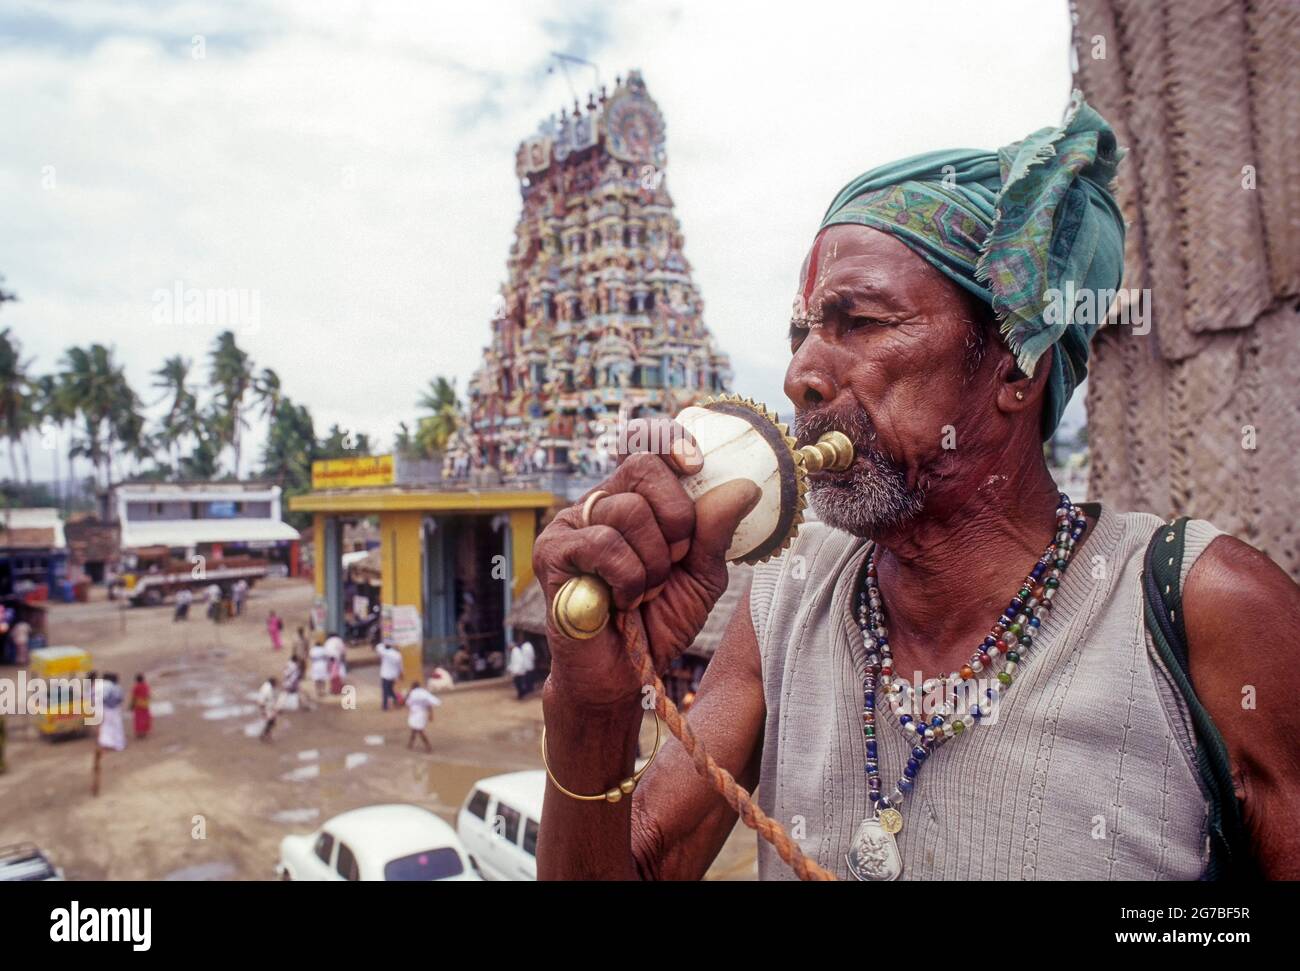 A Sadhu blowing a conch shell in front of Patteeswarar Swamy Temple at Perur in Coimbatore, Tamil Nadu, India Stock Photo